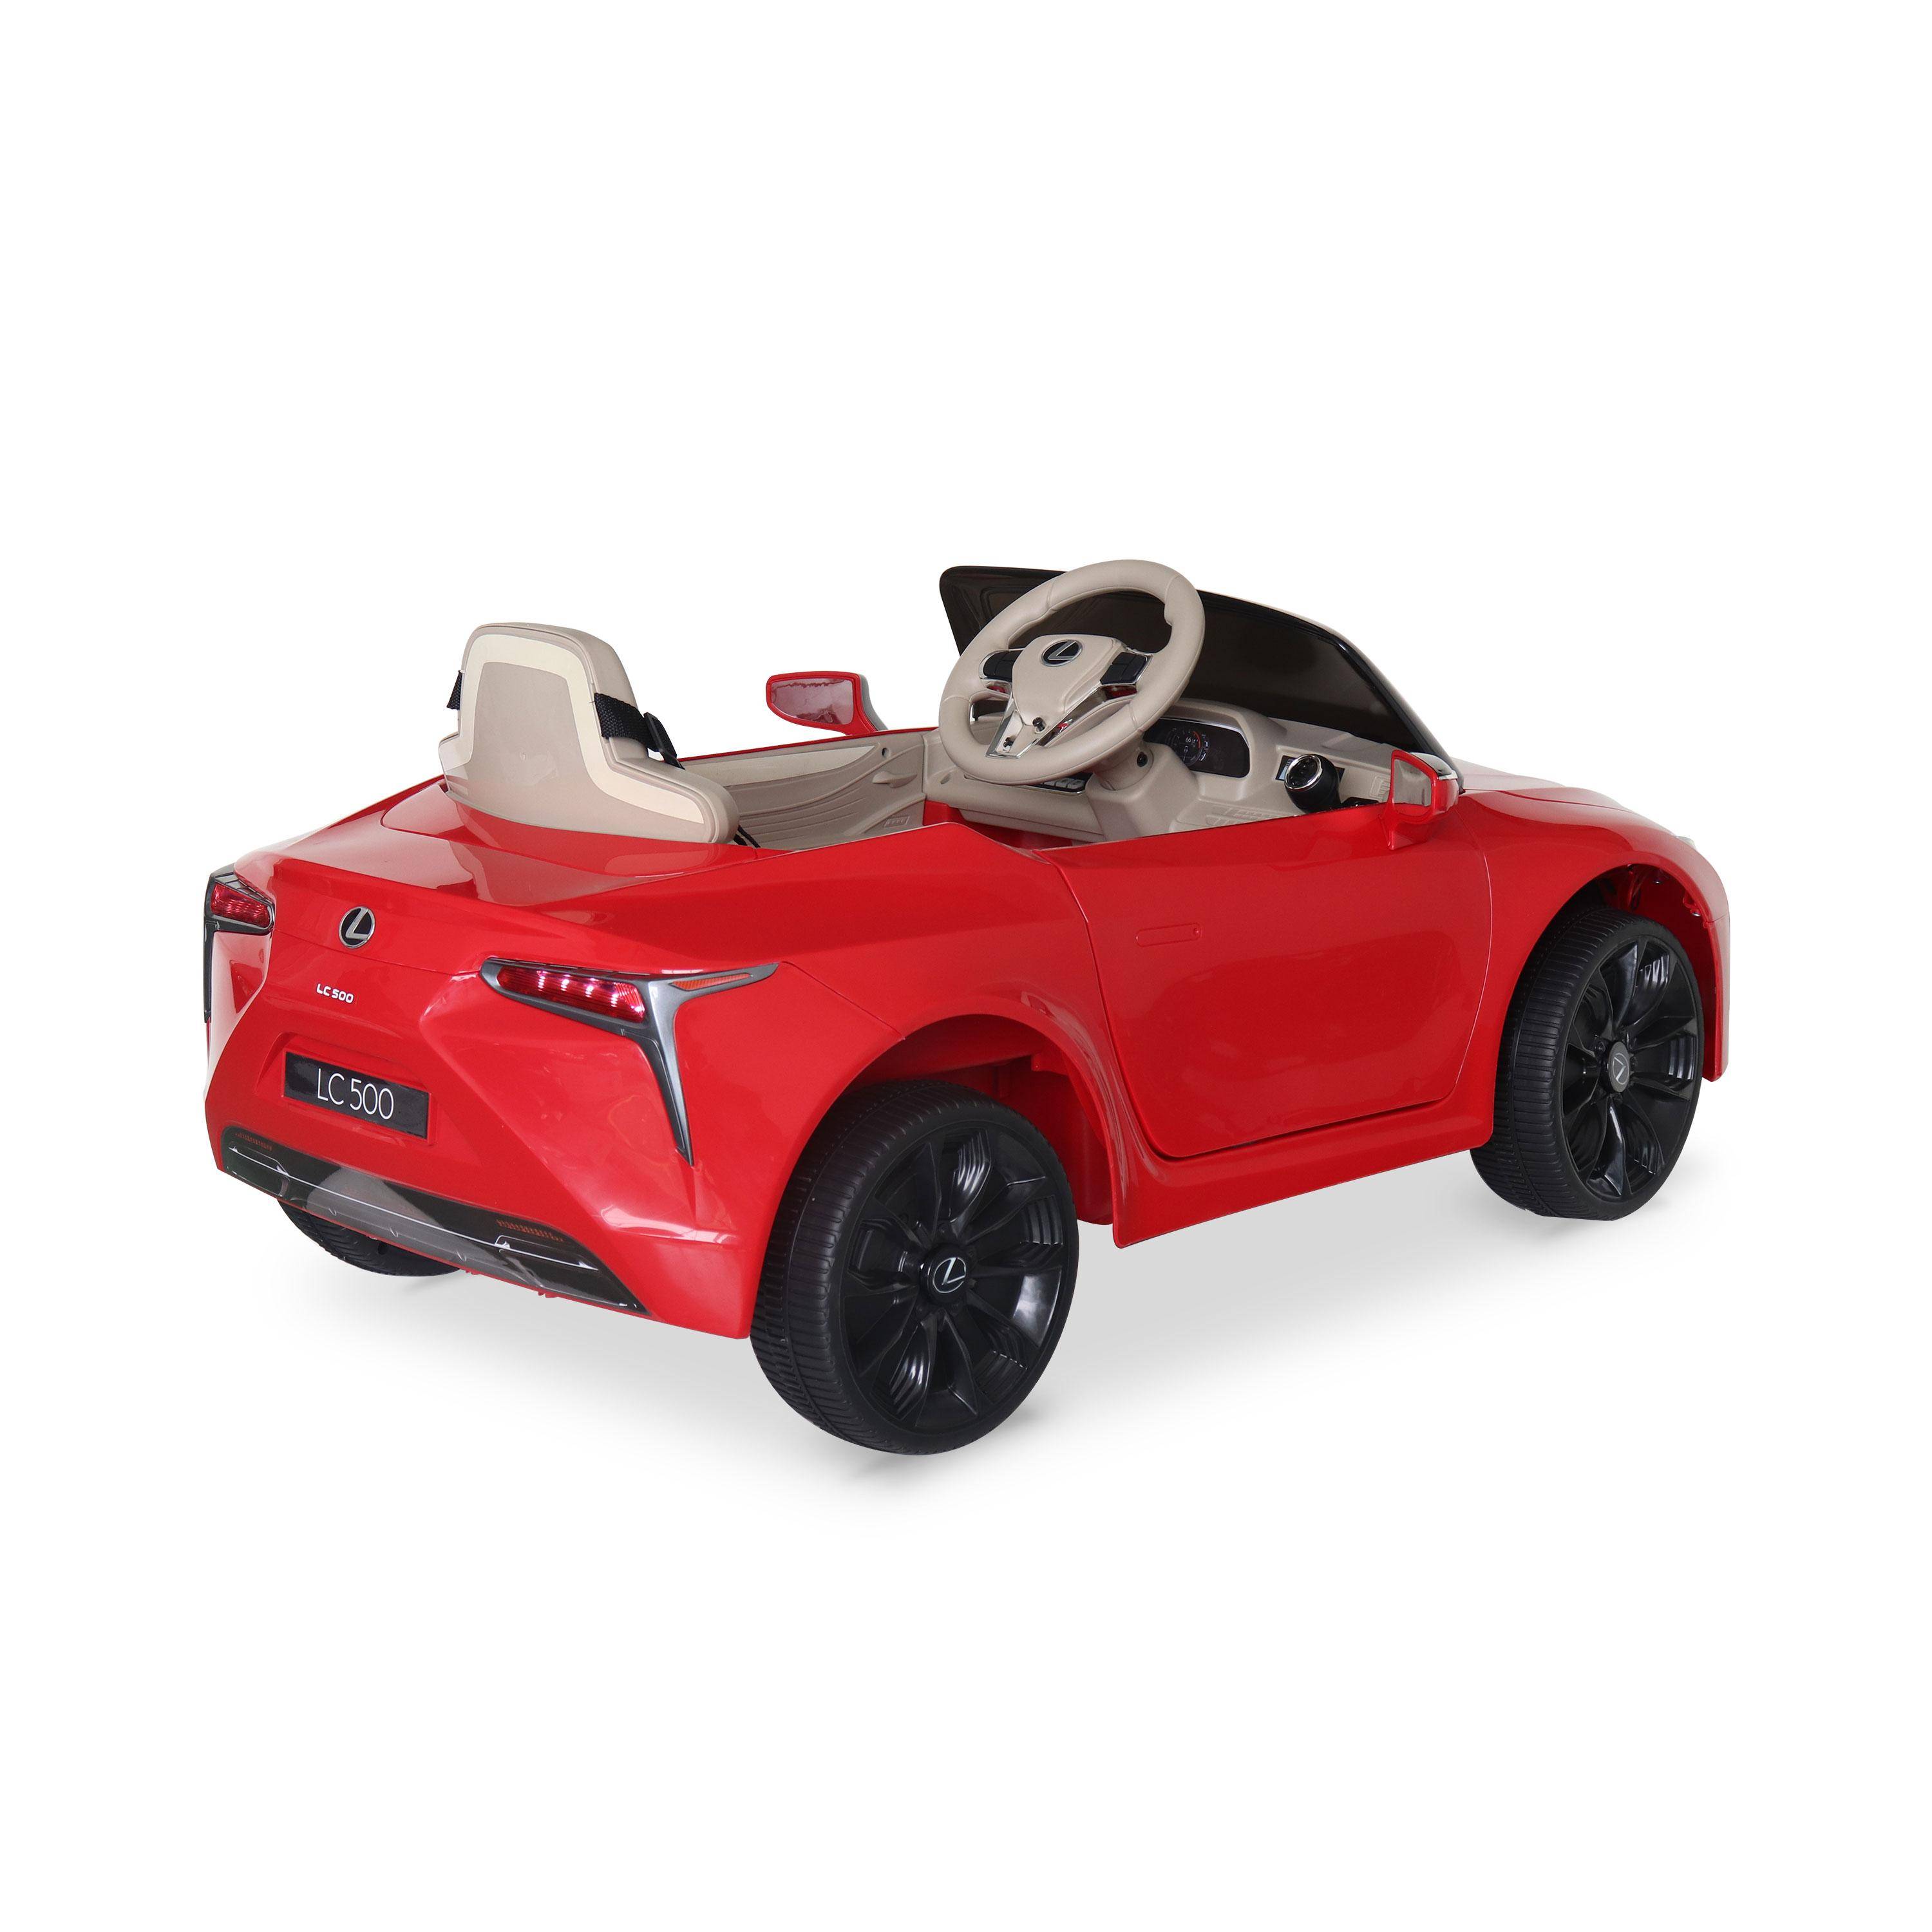 Children's electric car 12V, 1 seat, 4x4 with car radio and remote control - Lexus LC500 - Red,sweeek,Photo3